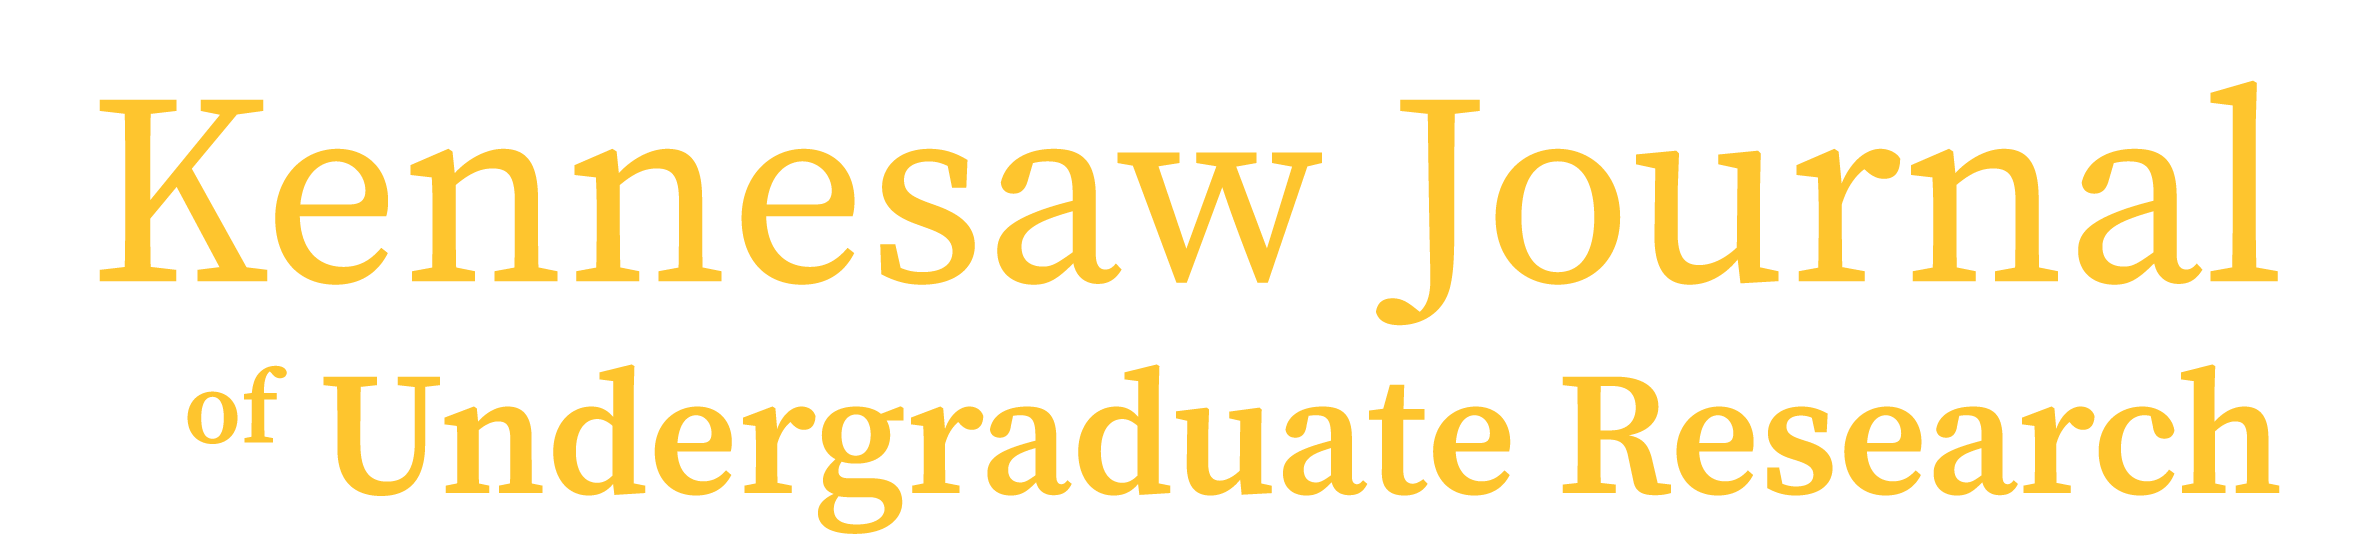 Kennesaw Journal of Undergraduate Research